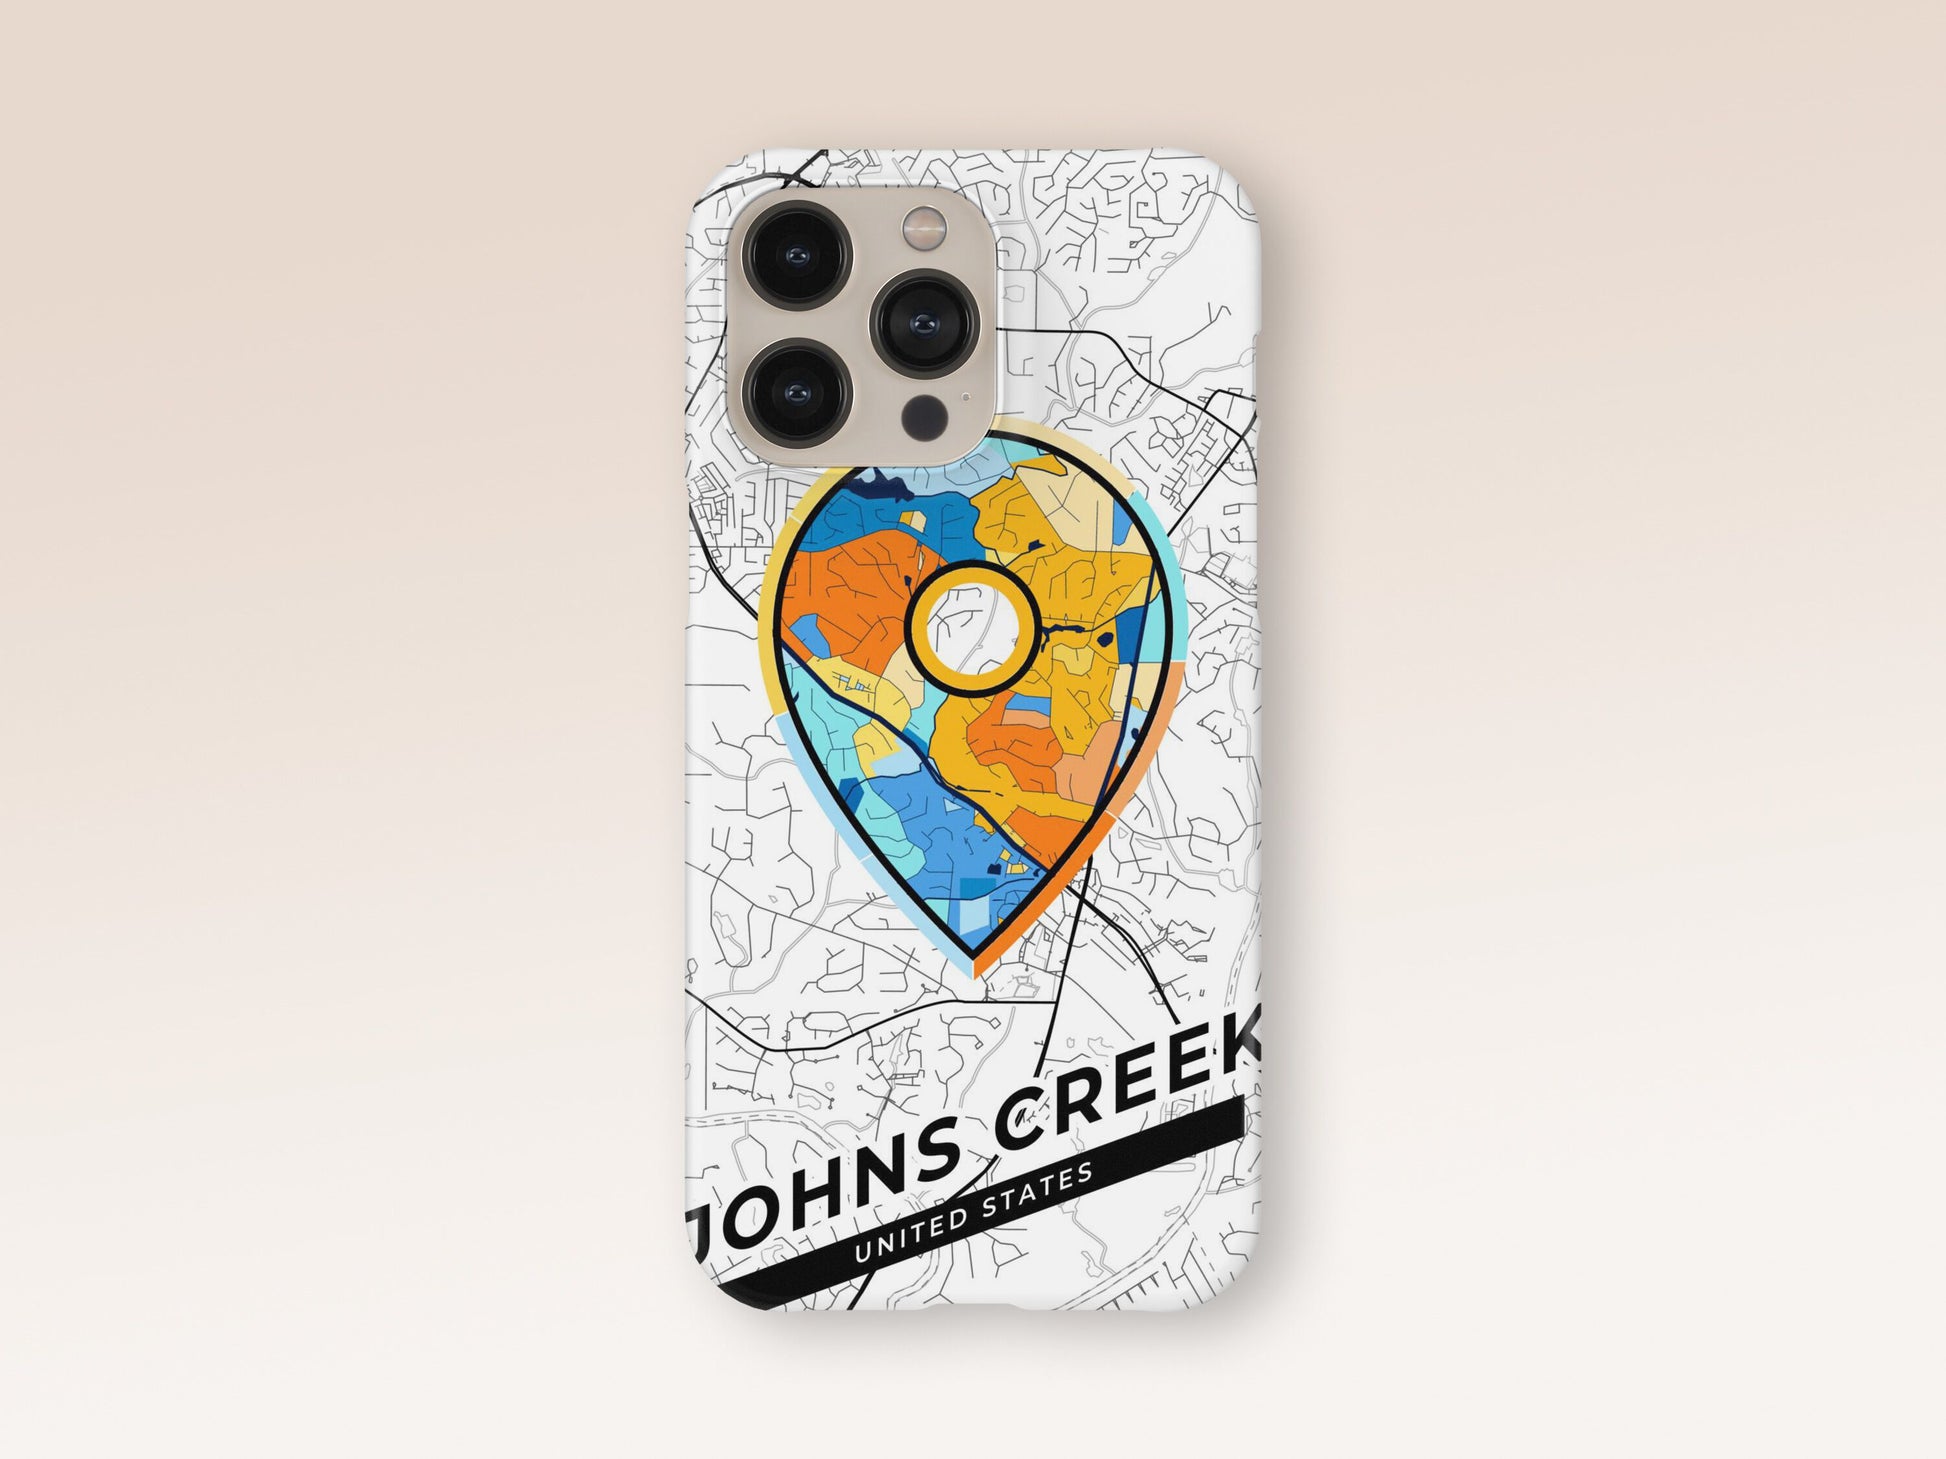 Johns Creek Georgia slim phone case with colorful icon. Birthday, wedding or housewarming gift. Couple match cases. 1